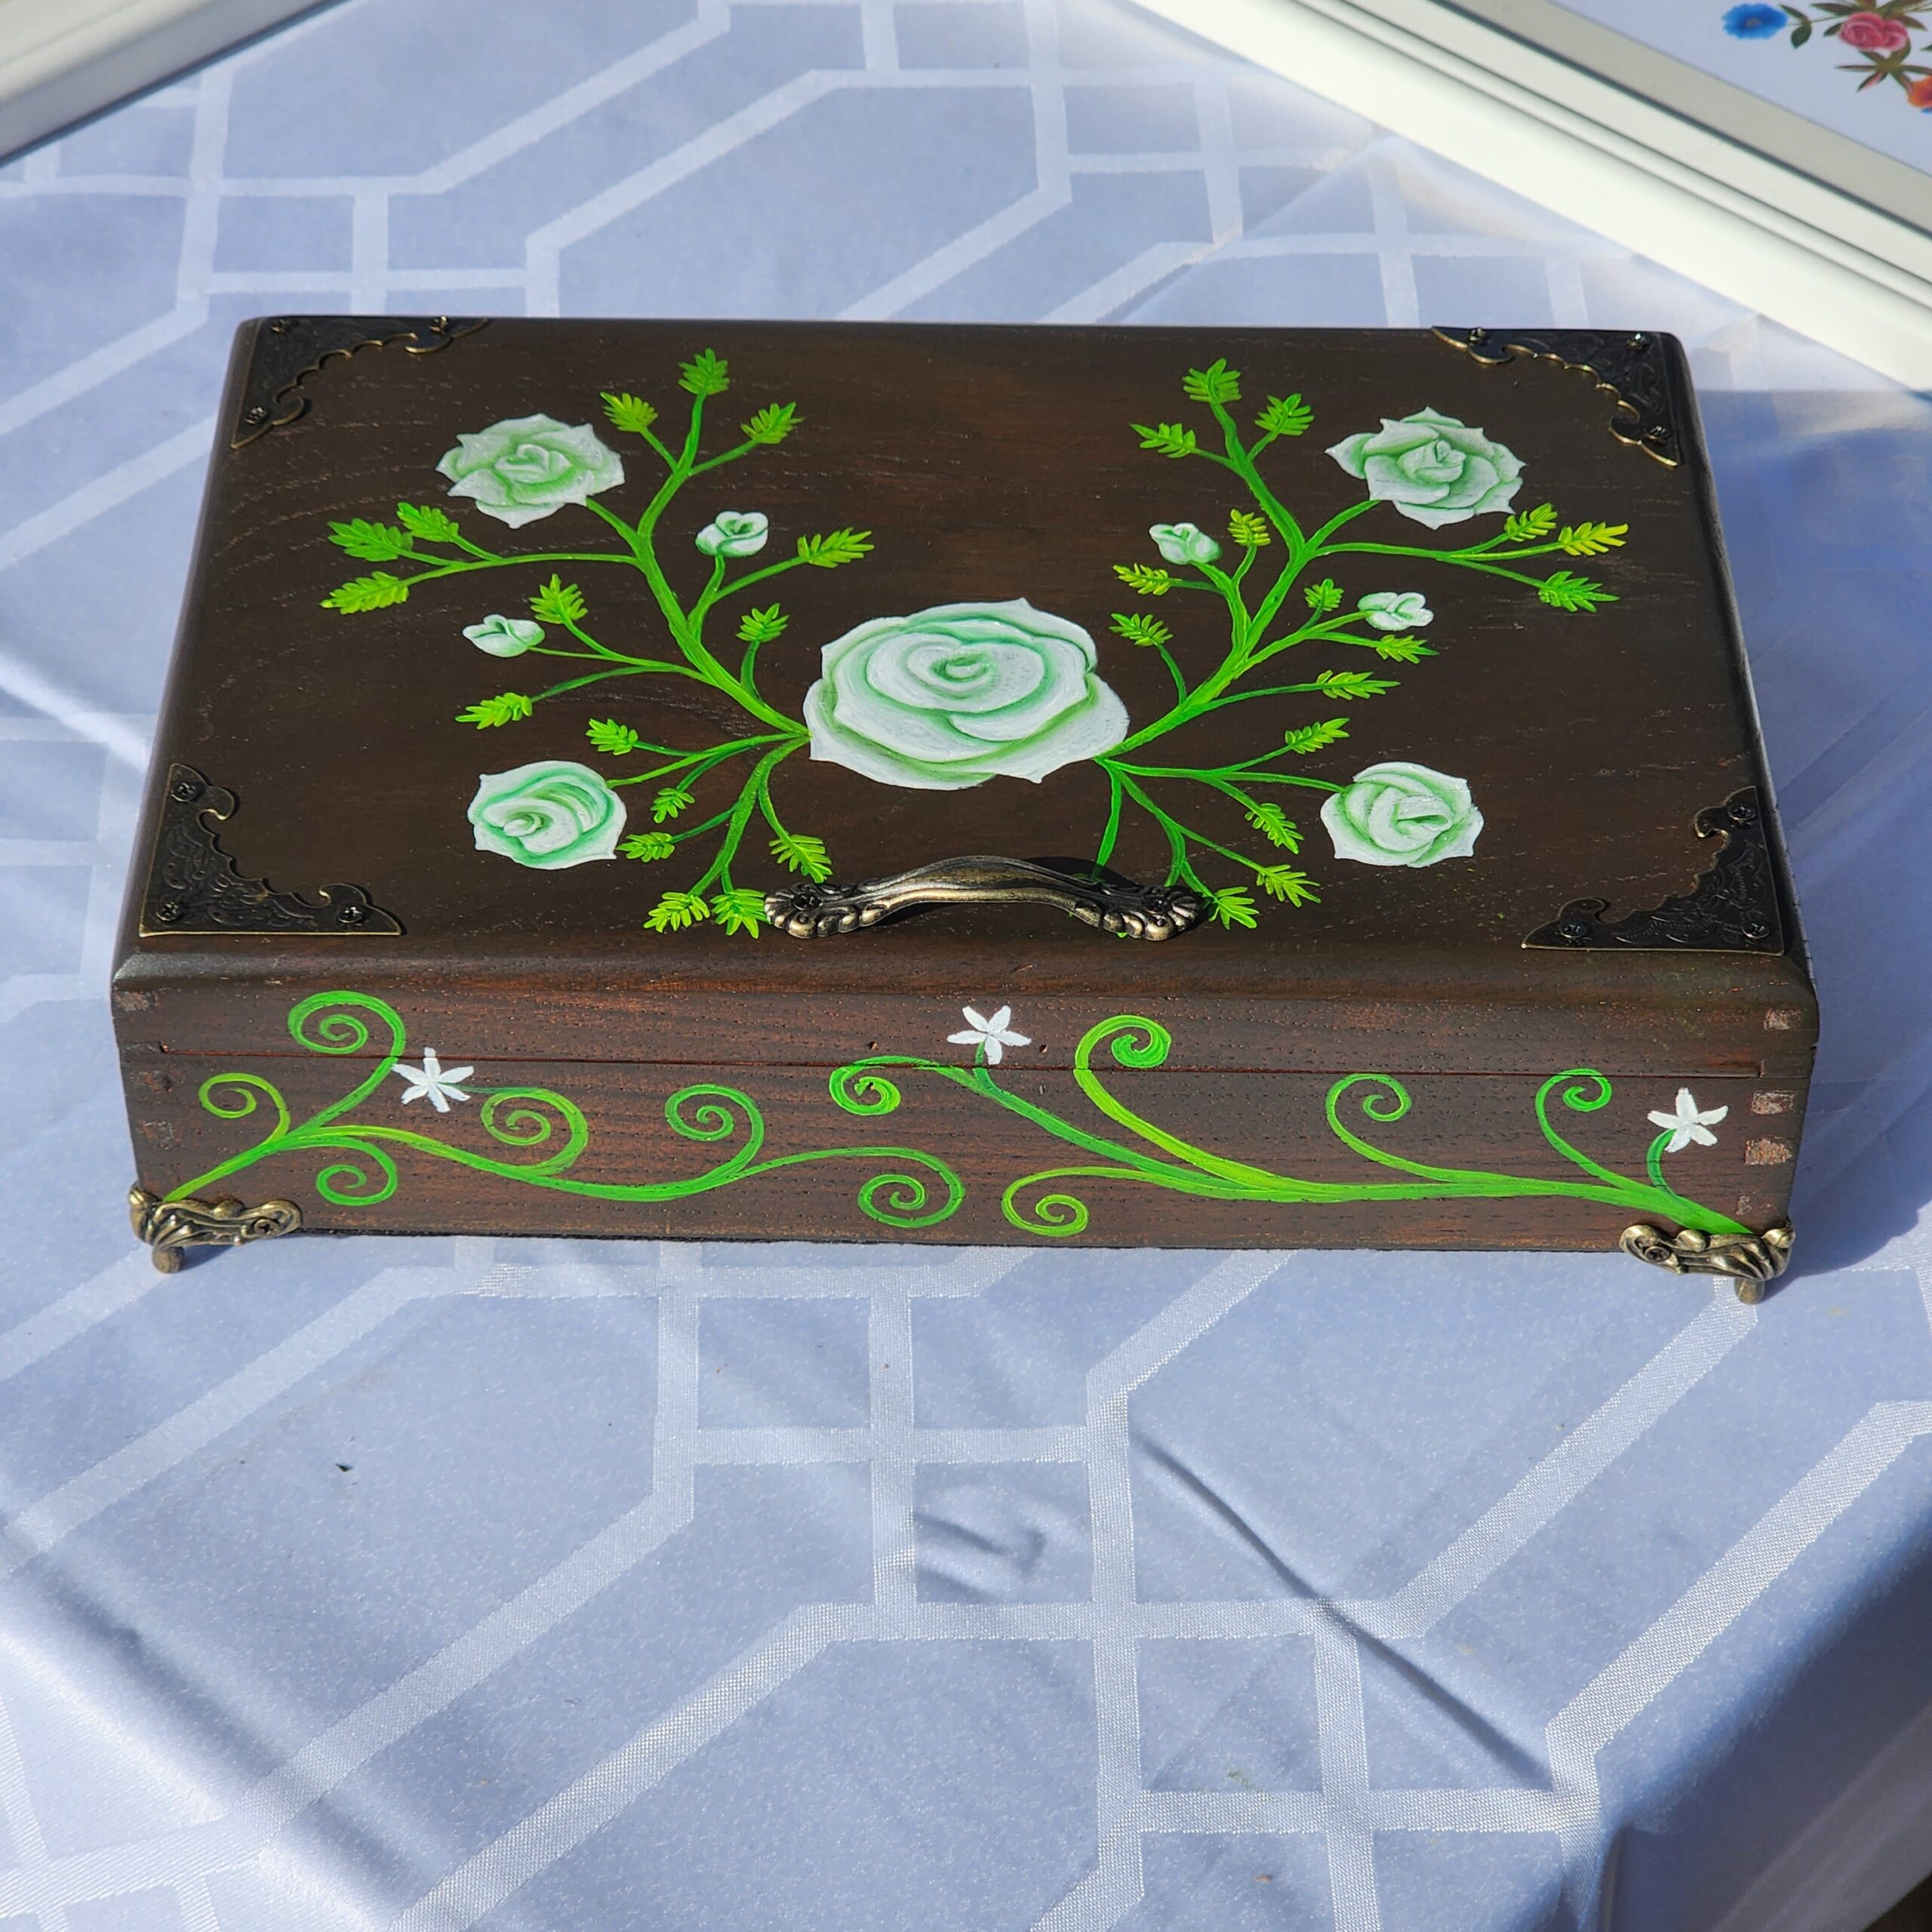 Beautiful handpainted antique wooden trinket box. This cute trinket box is an ideal gift for a special loved one. You can store jewelry such as rings, necklaces, bracelets, or anything you would like to keep in a particular place, especially in this elegant and artistic trinket box.